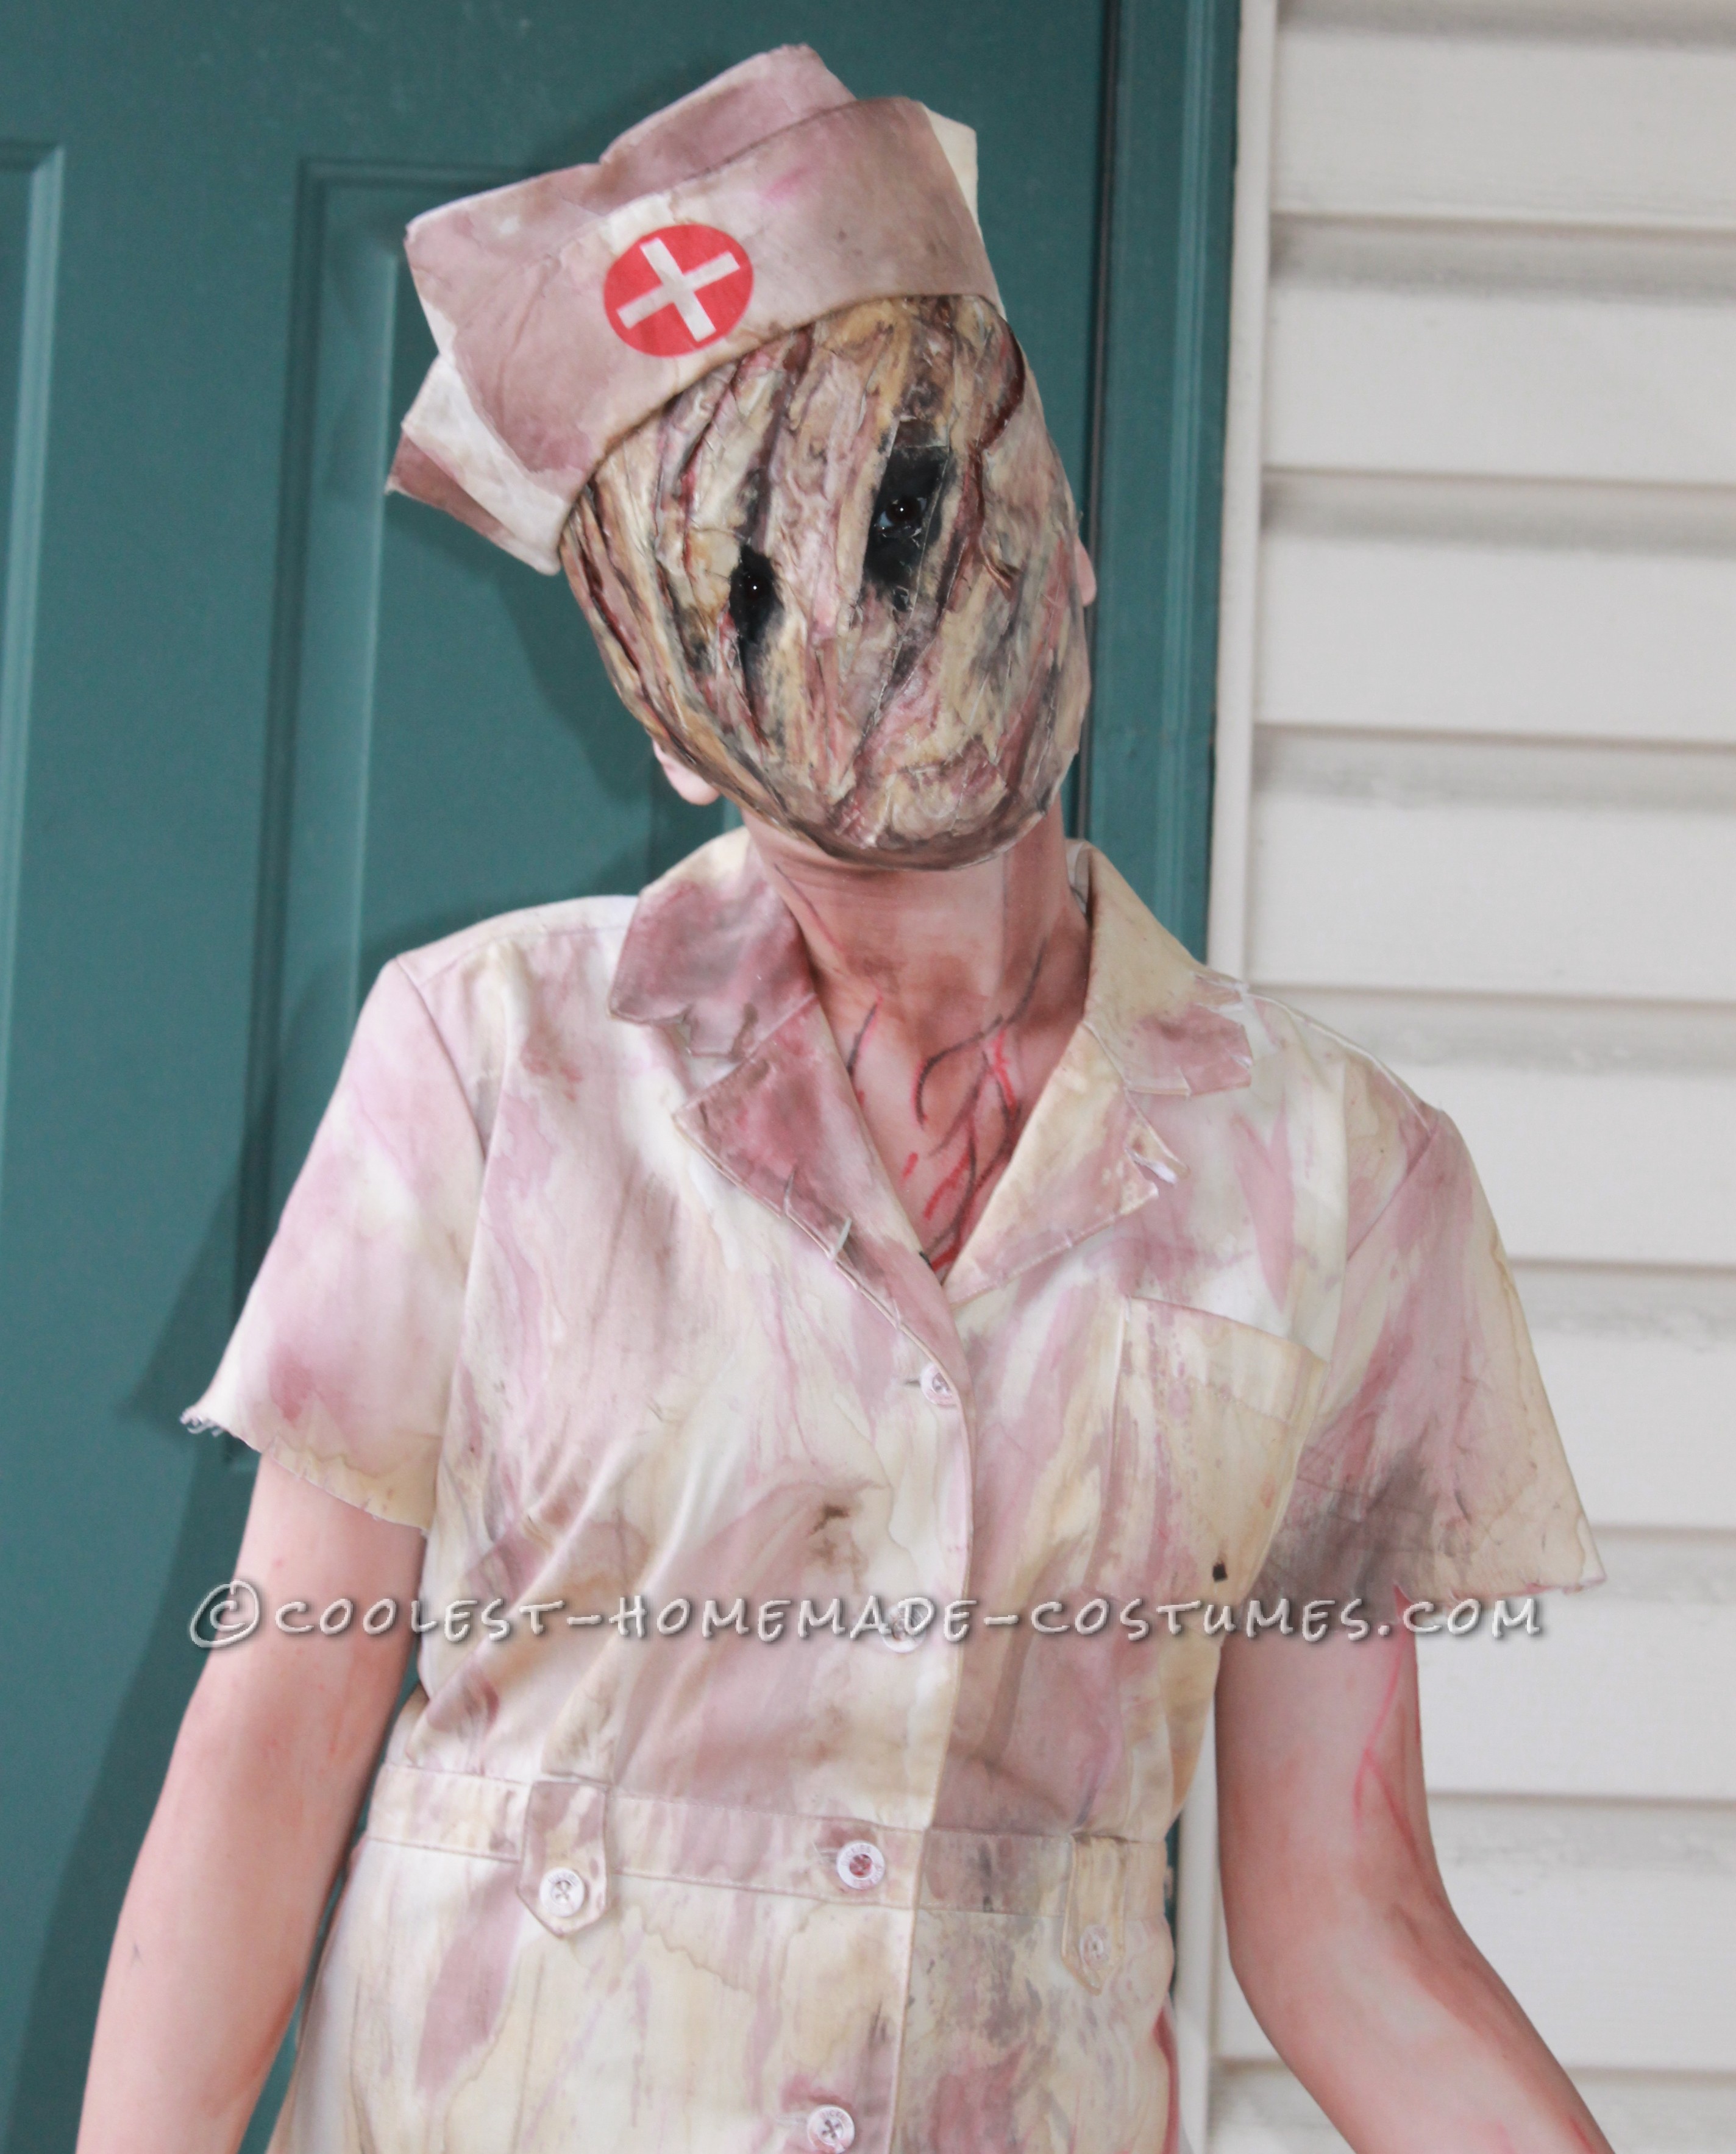 The Absolutely Scariest Silent Hill Costume for a 13-Year Old Girl